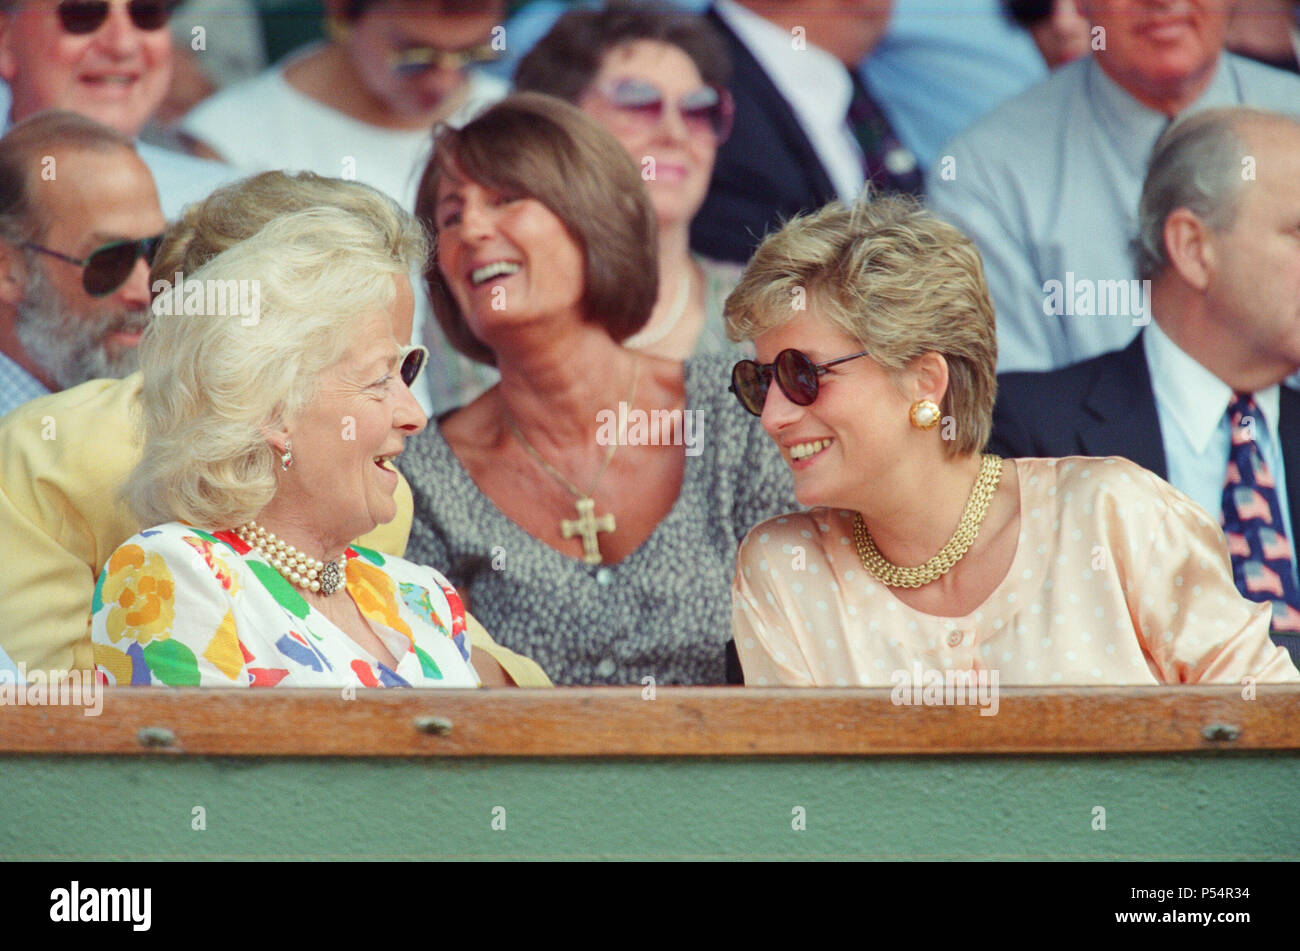 HRH The Princess of Wales, Princess Diana, attends the 1993 Men's Singles Wimbledon Tennis Final. She wears or attends to her sunglasses for most of the pictures on this sunny day as it was. The Princess is shown sitting next to her mother Frances Shand Kydd. Regarding the match, Pete Sampras defeated Jim Courier 7¿(7¿), 7¿(8¿), 3¿, 6¿in the final to win the Gentlemen's Singles title at the 1993 Wimbledon Championships. This was the first of Pete's Open Era record of seven Wimbledon titles.  Picture taken 4th July 1993 Stock Photo